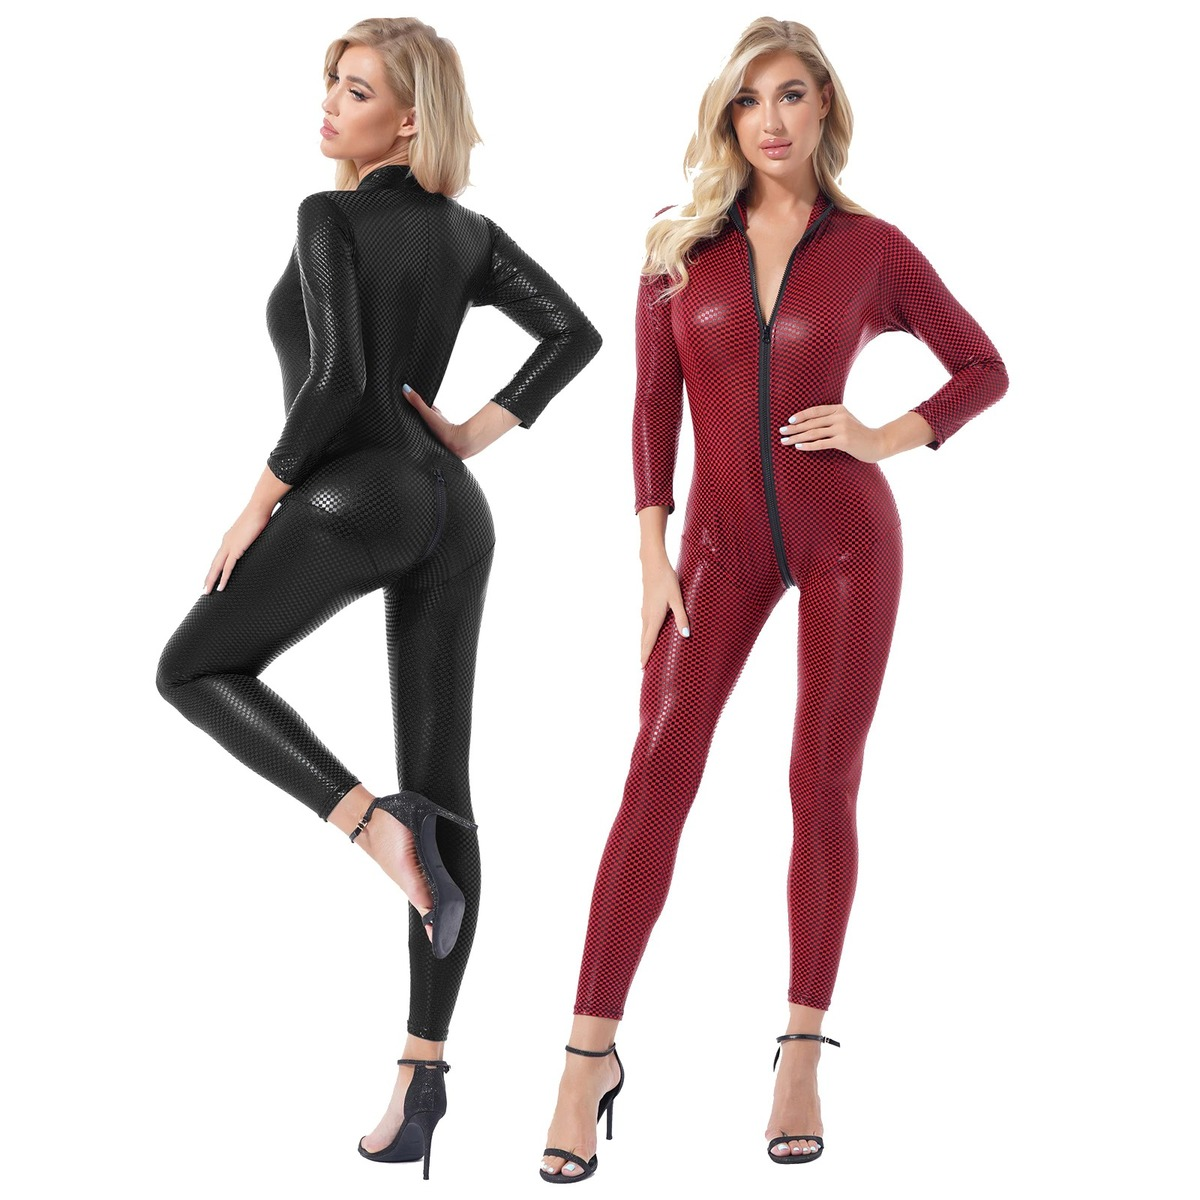 Women's Patent Leather Bodysuit with Long Sleeve / Sexy Skinny Jumpsuit on Zipper - EVE's SECRETS